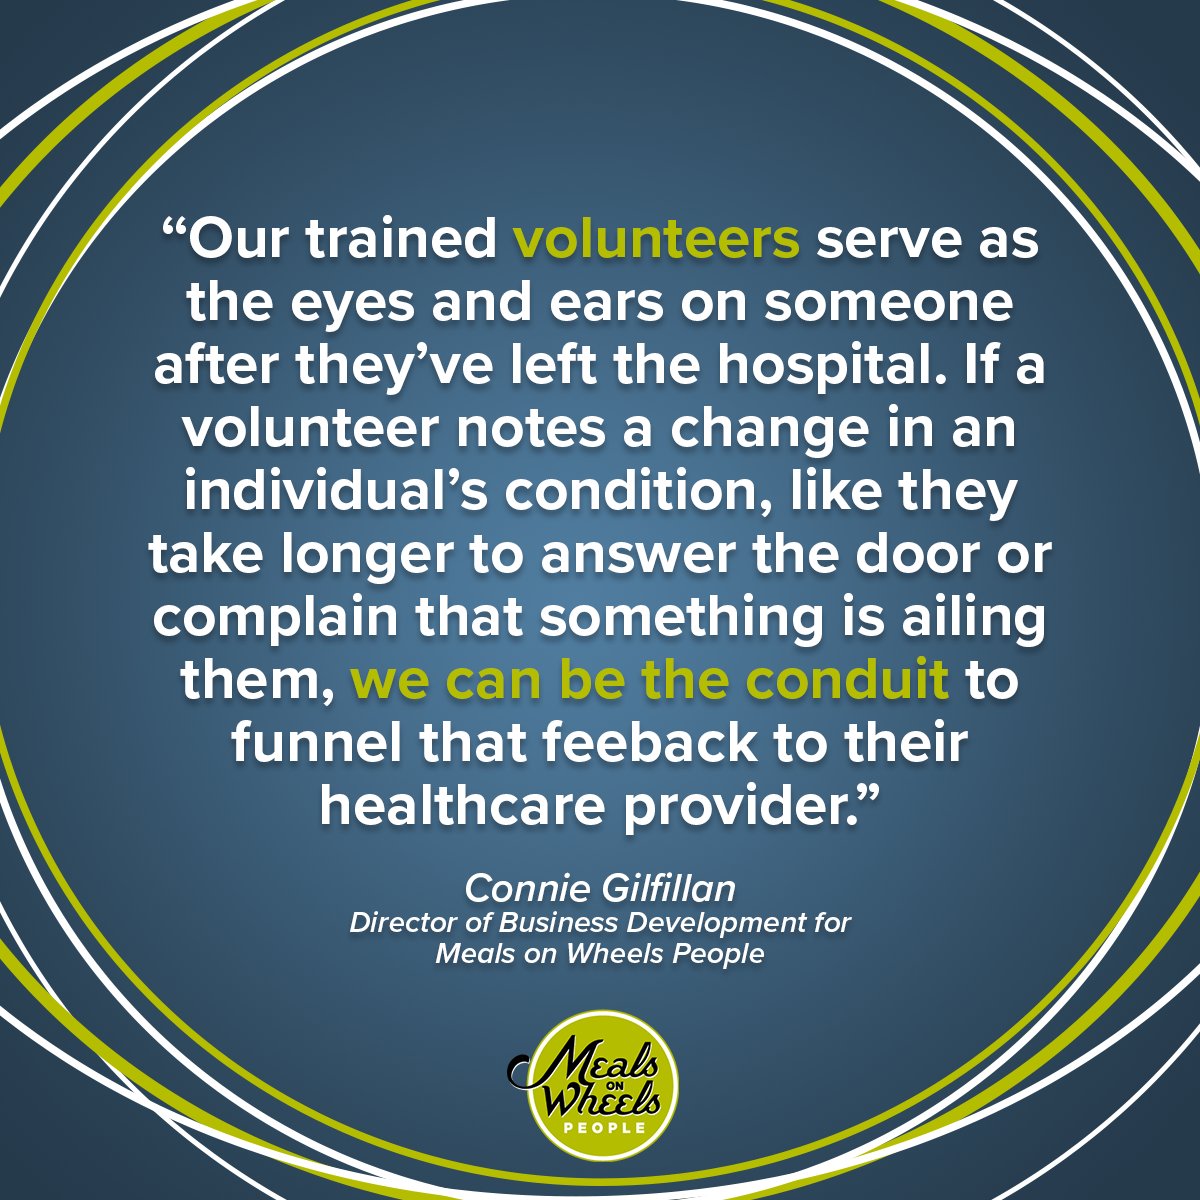 In our #MedicallyTailoredMeal program, our volunteers are the eyes and ears for our participants, providing a crucial link back to healthcare providers. Learn more about the impact of our MTM program and the extraordinary role of our volunteers: bit.ly/3u4IDq5